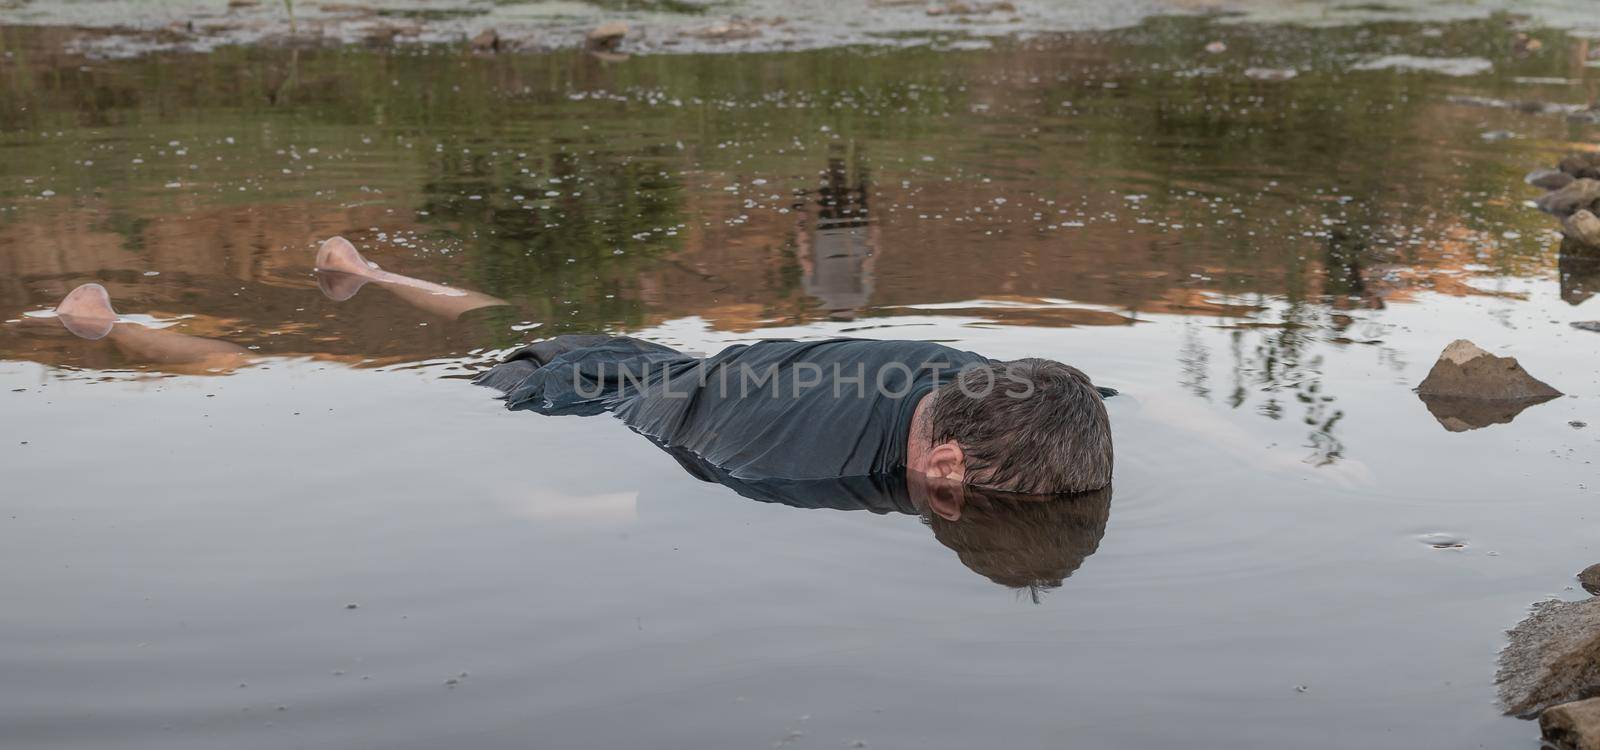 the body of a man who drowned, lying face down in the water lifeless body by studeg83